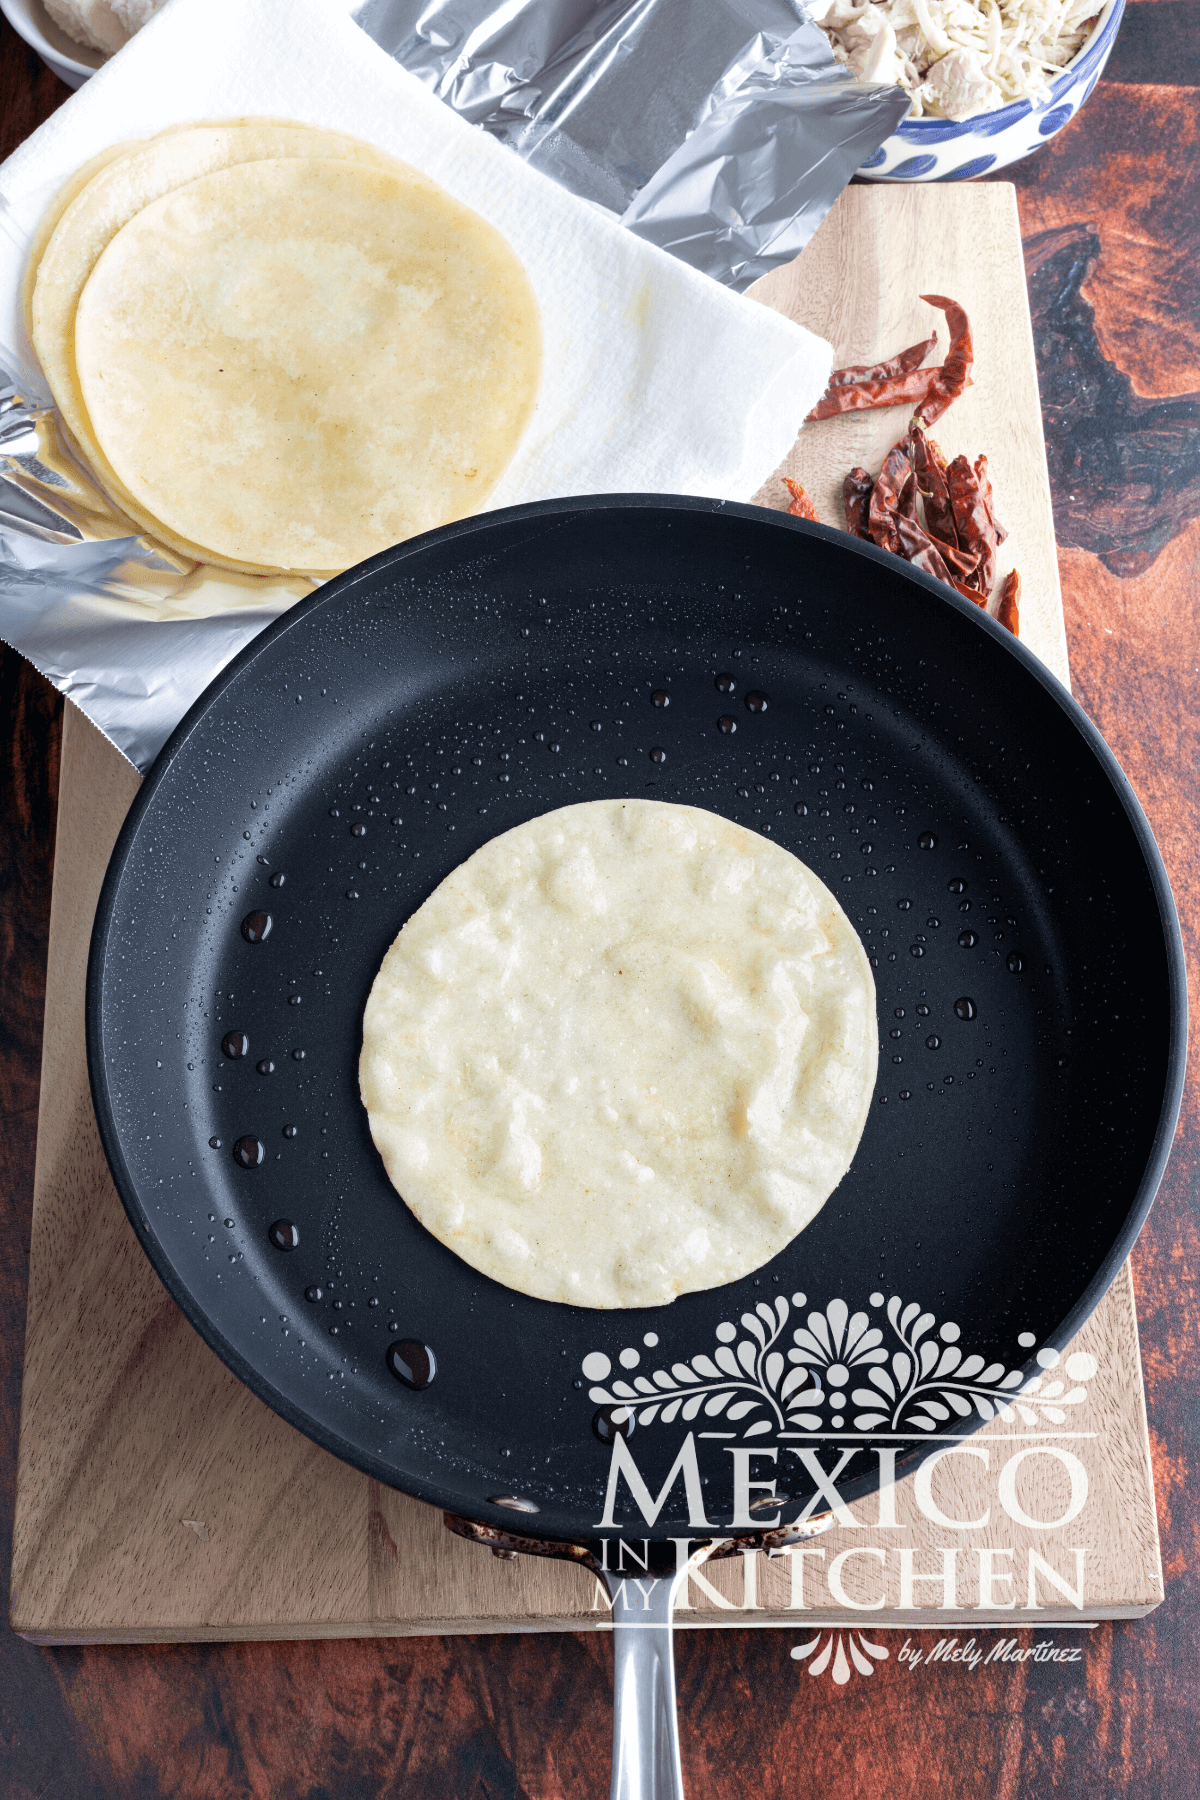 Slightly frying a corn tortilla in a frying pan with oil.